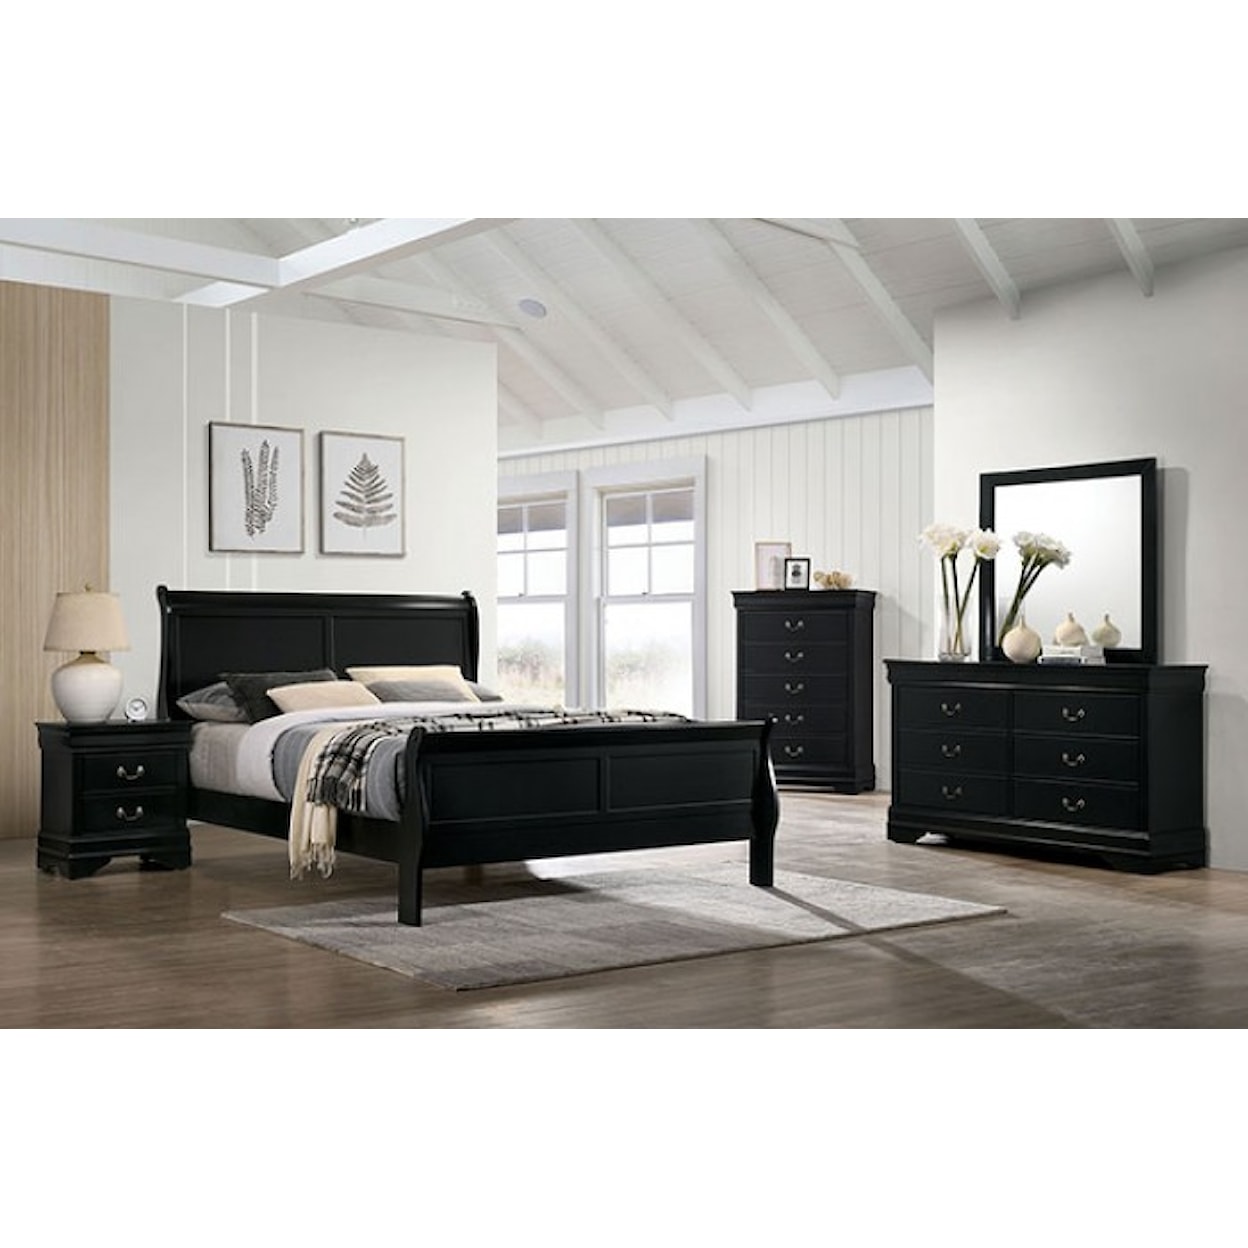 FUSA Louis Philippe Cal. King Bed, Black